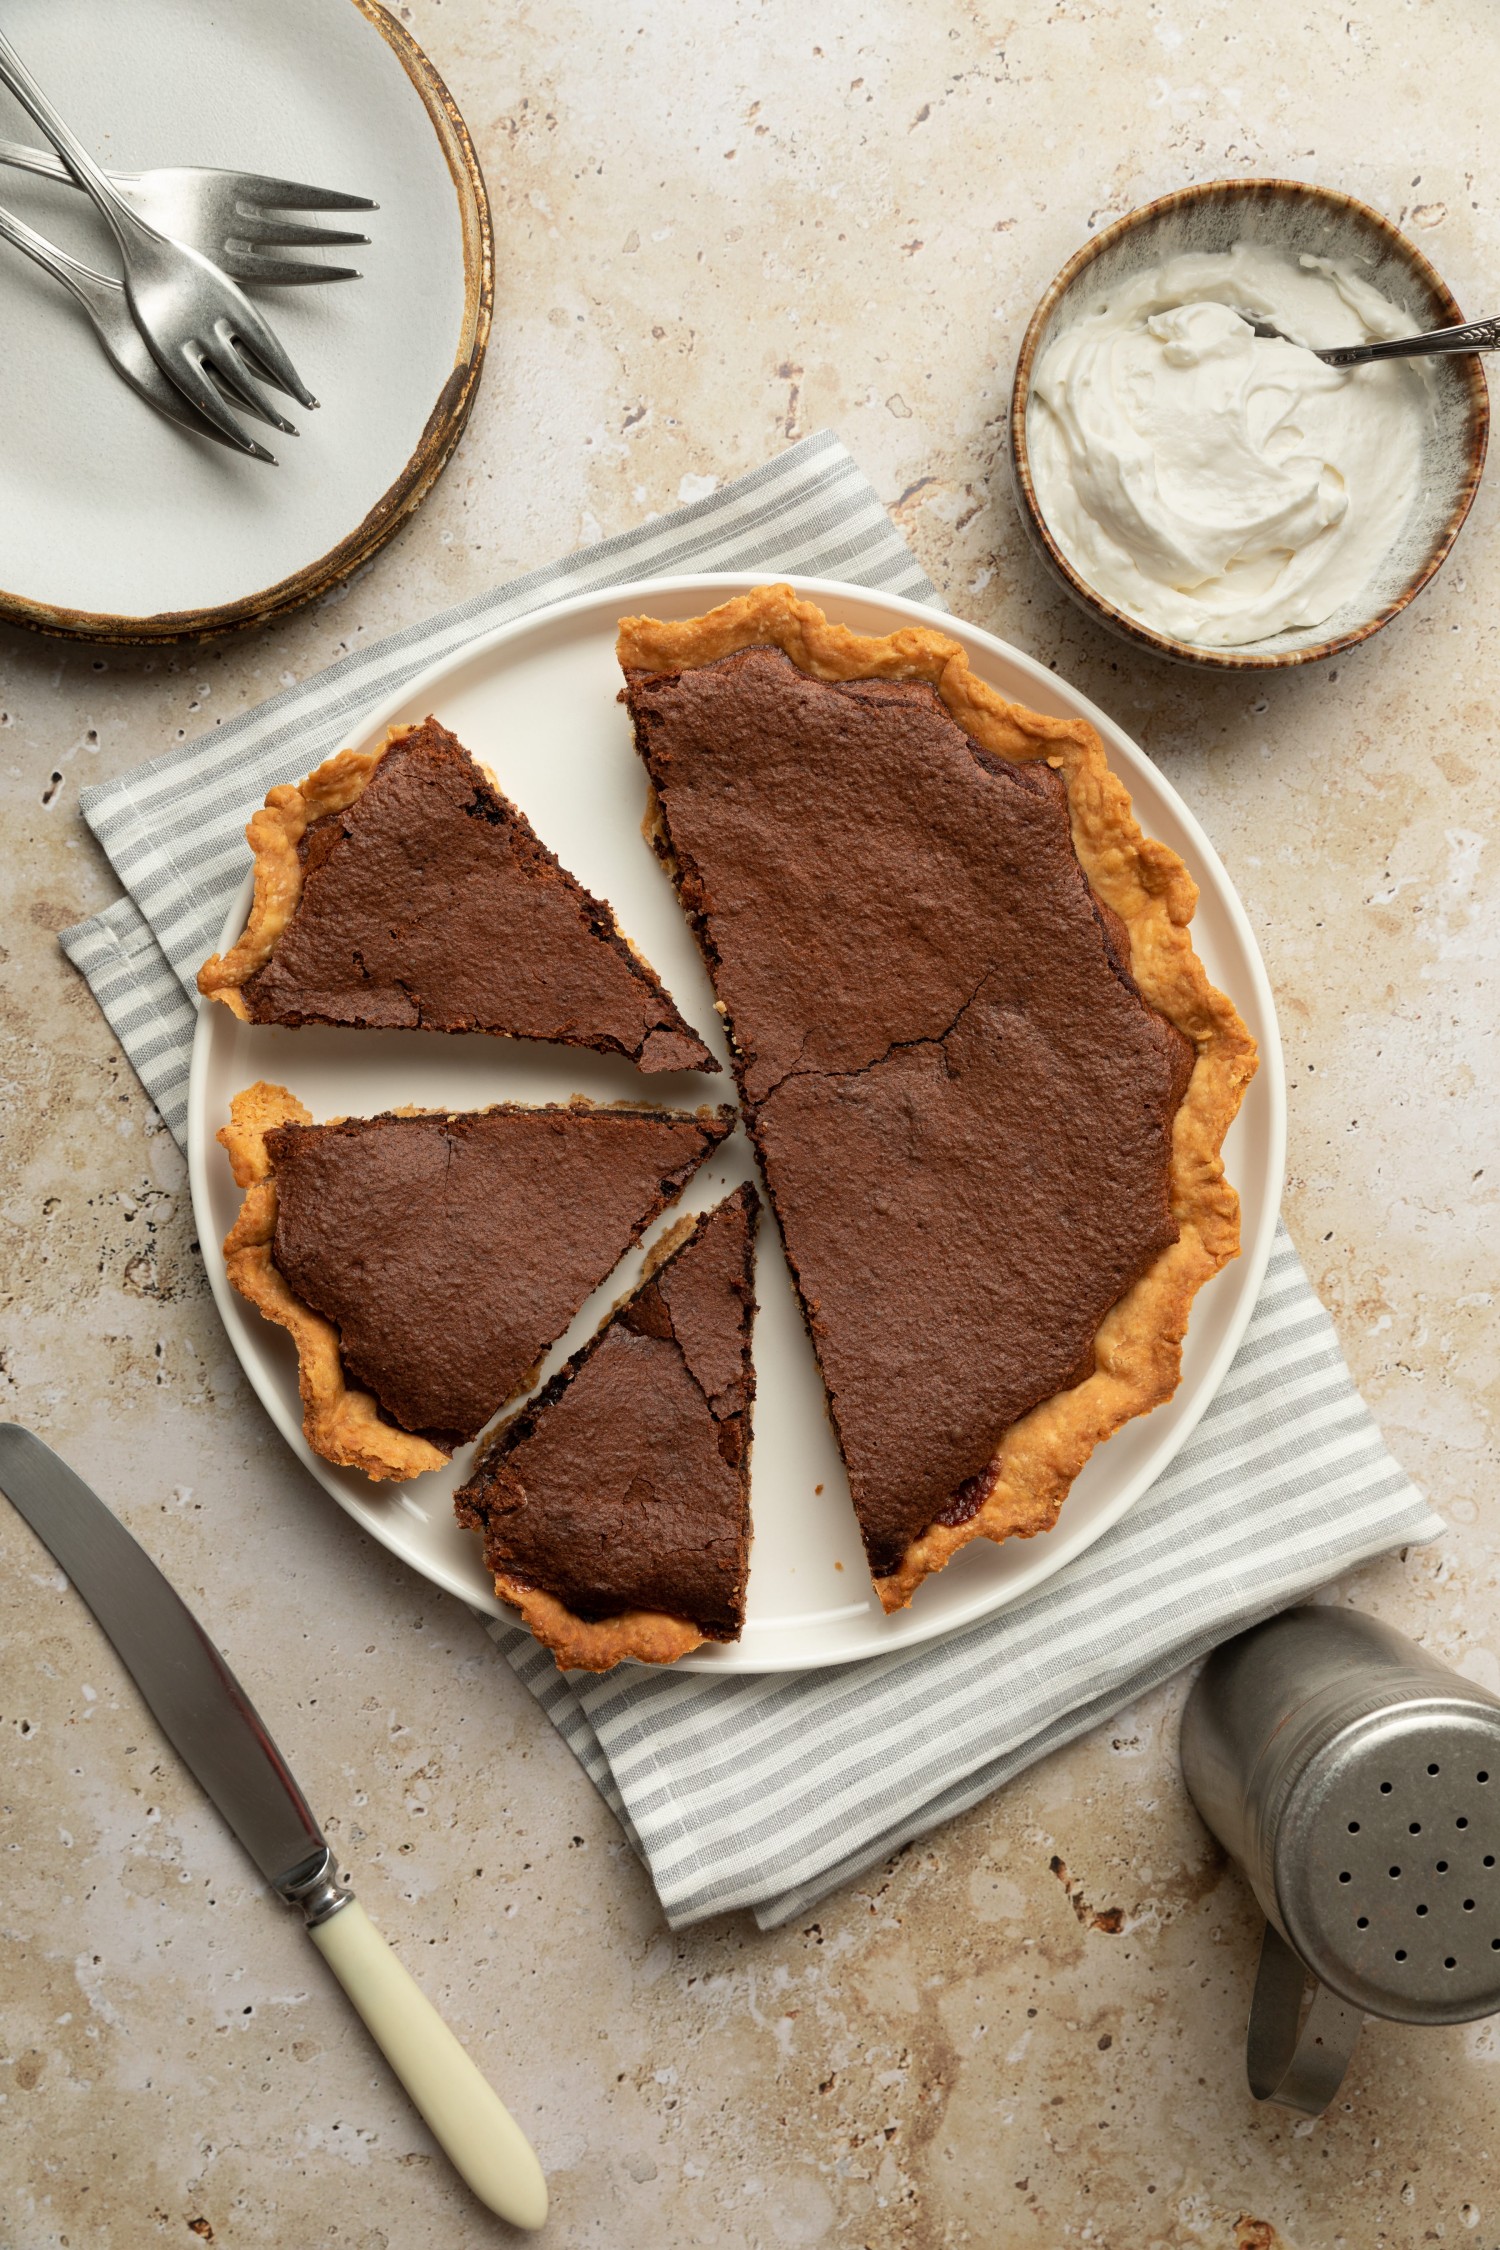 Above view of chocolate chess pie cut into slices